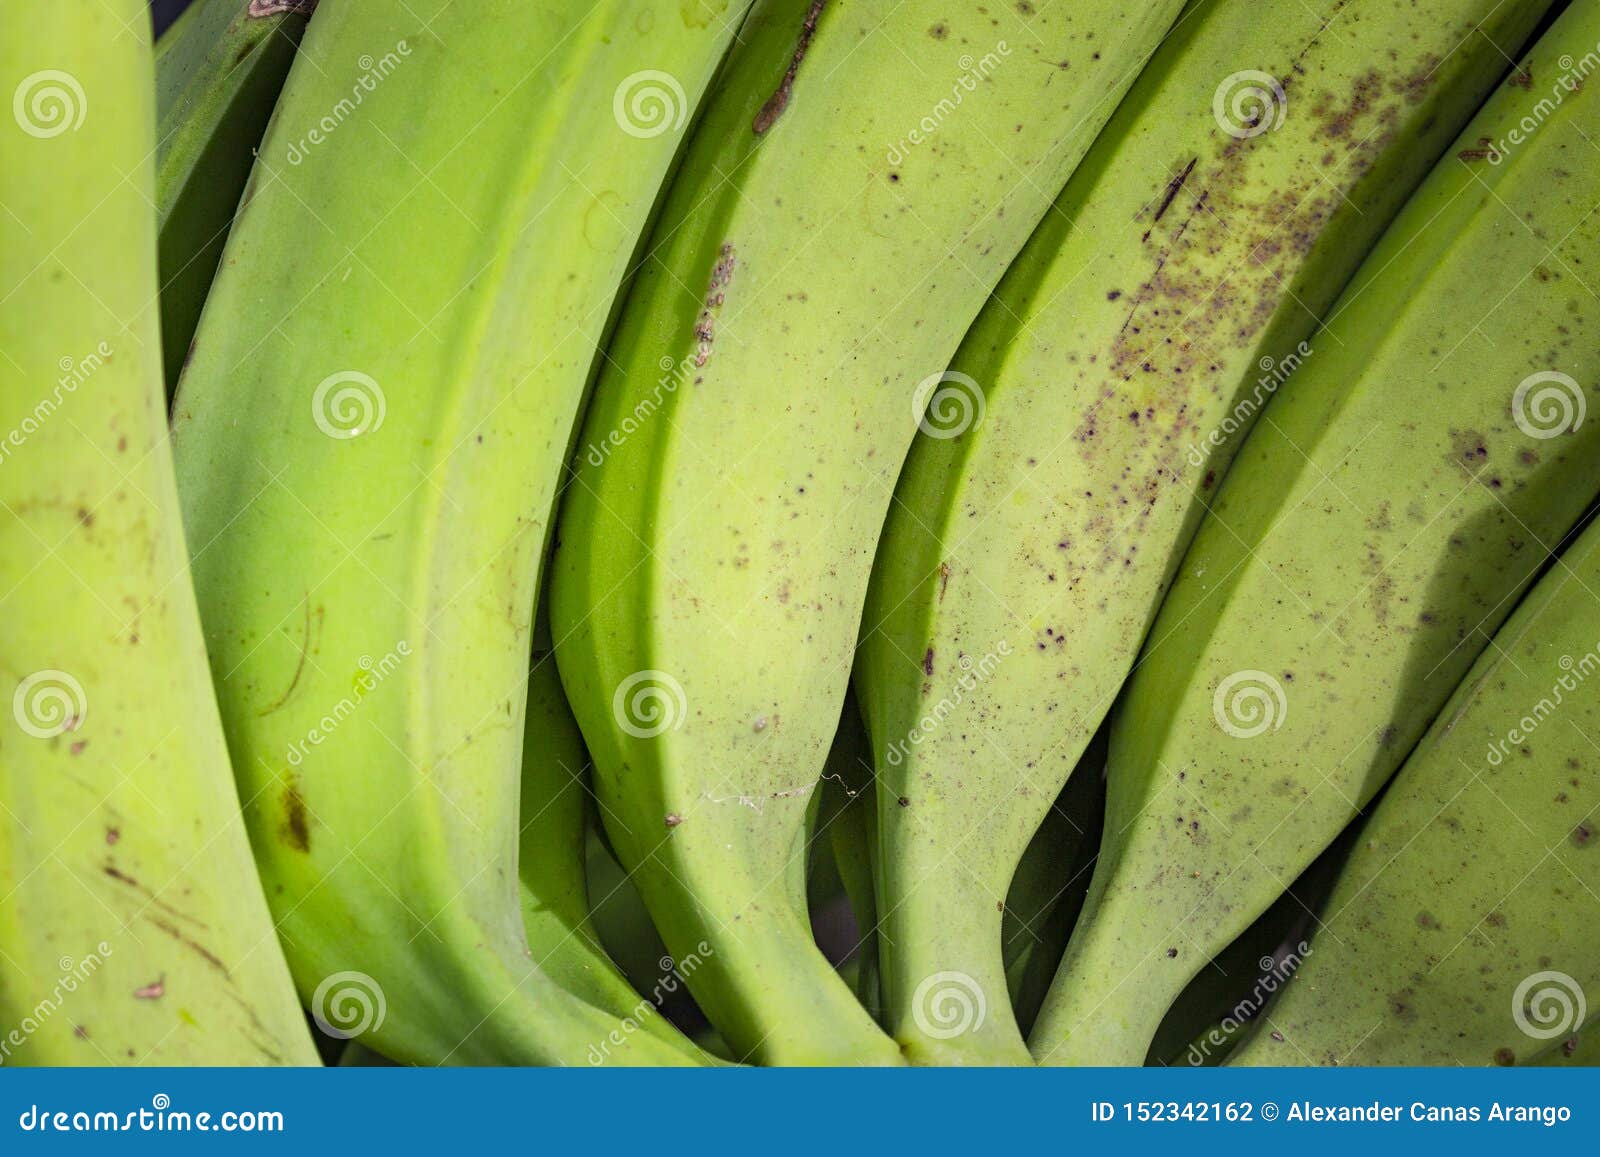 group of green bananas for sale